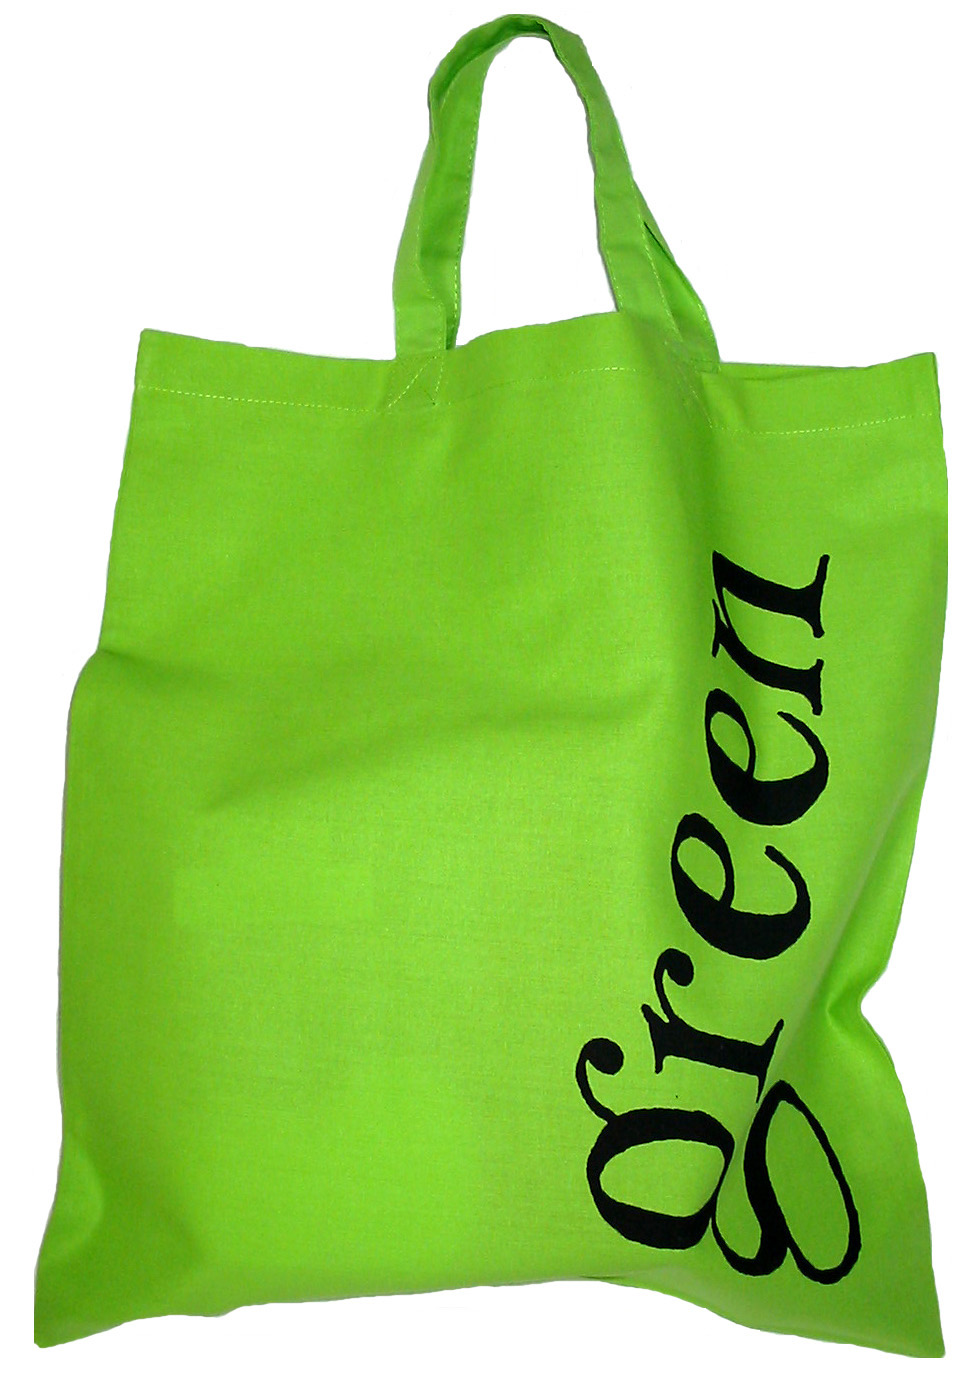 Pink, blue and green book bags | Lynne Rickards author